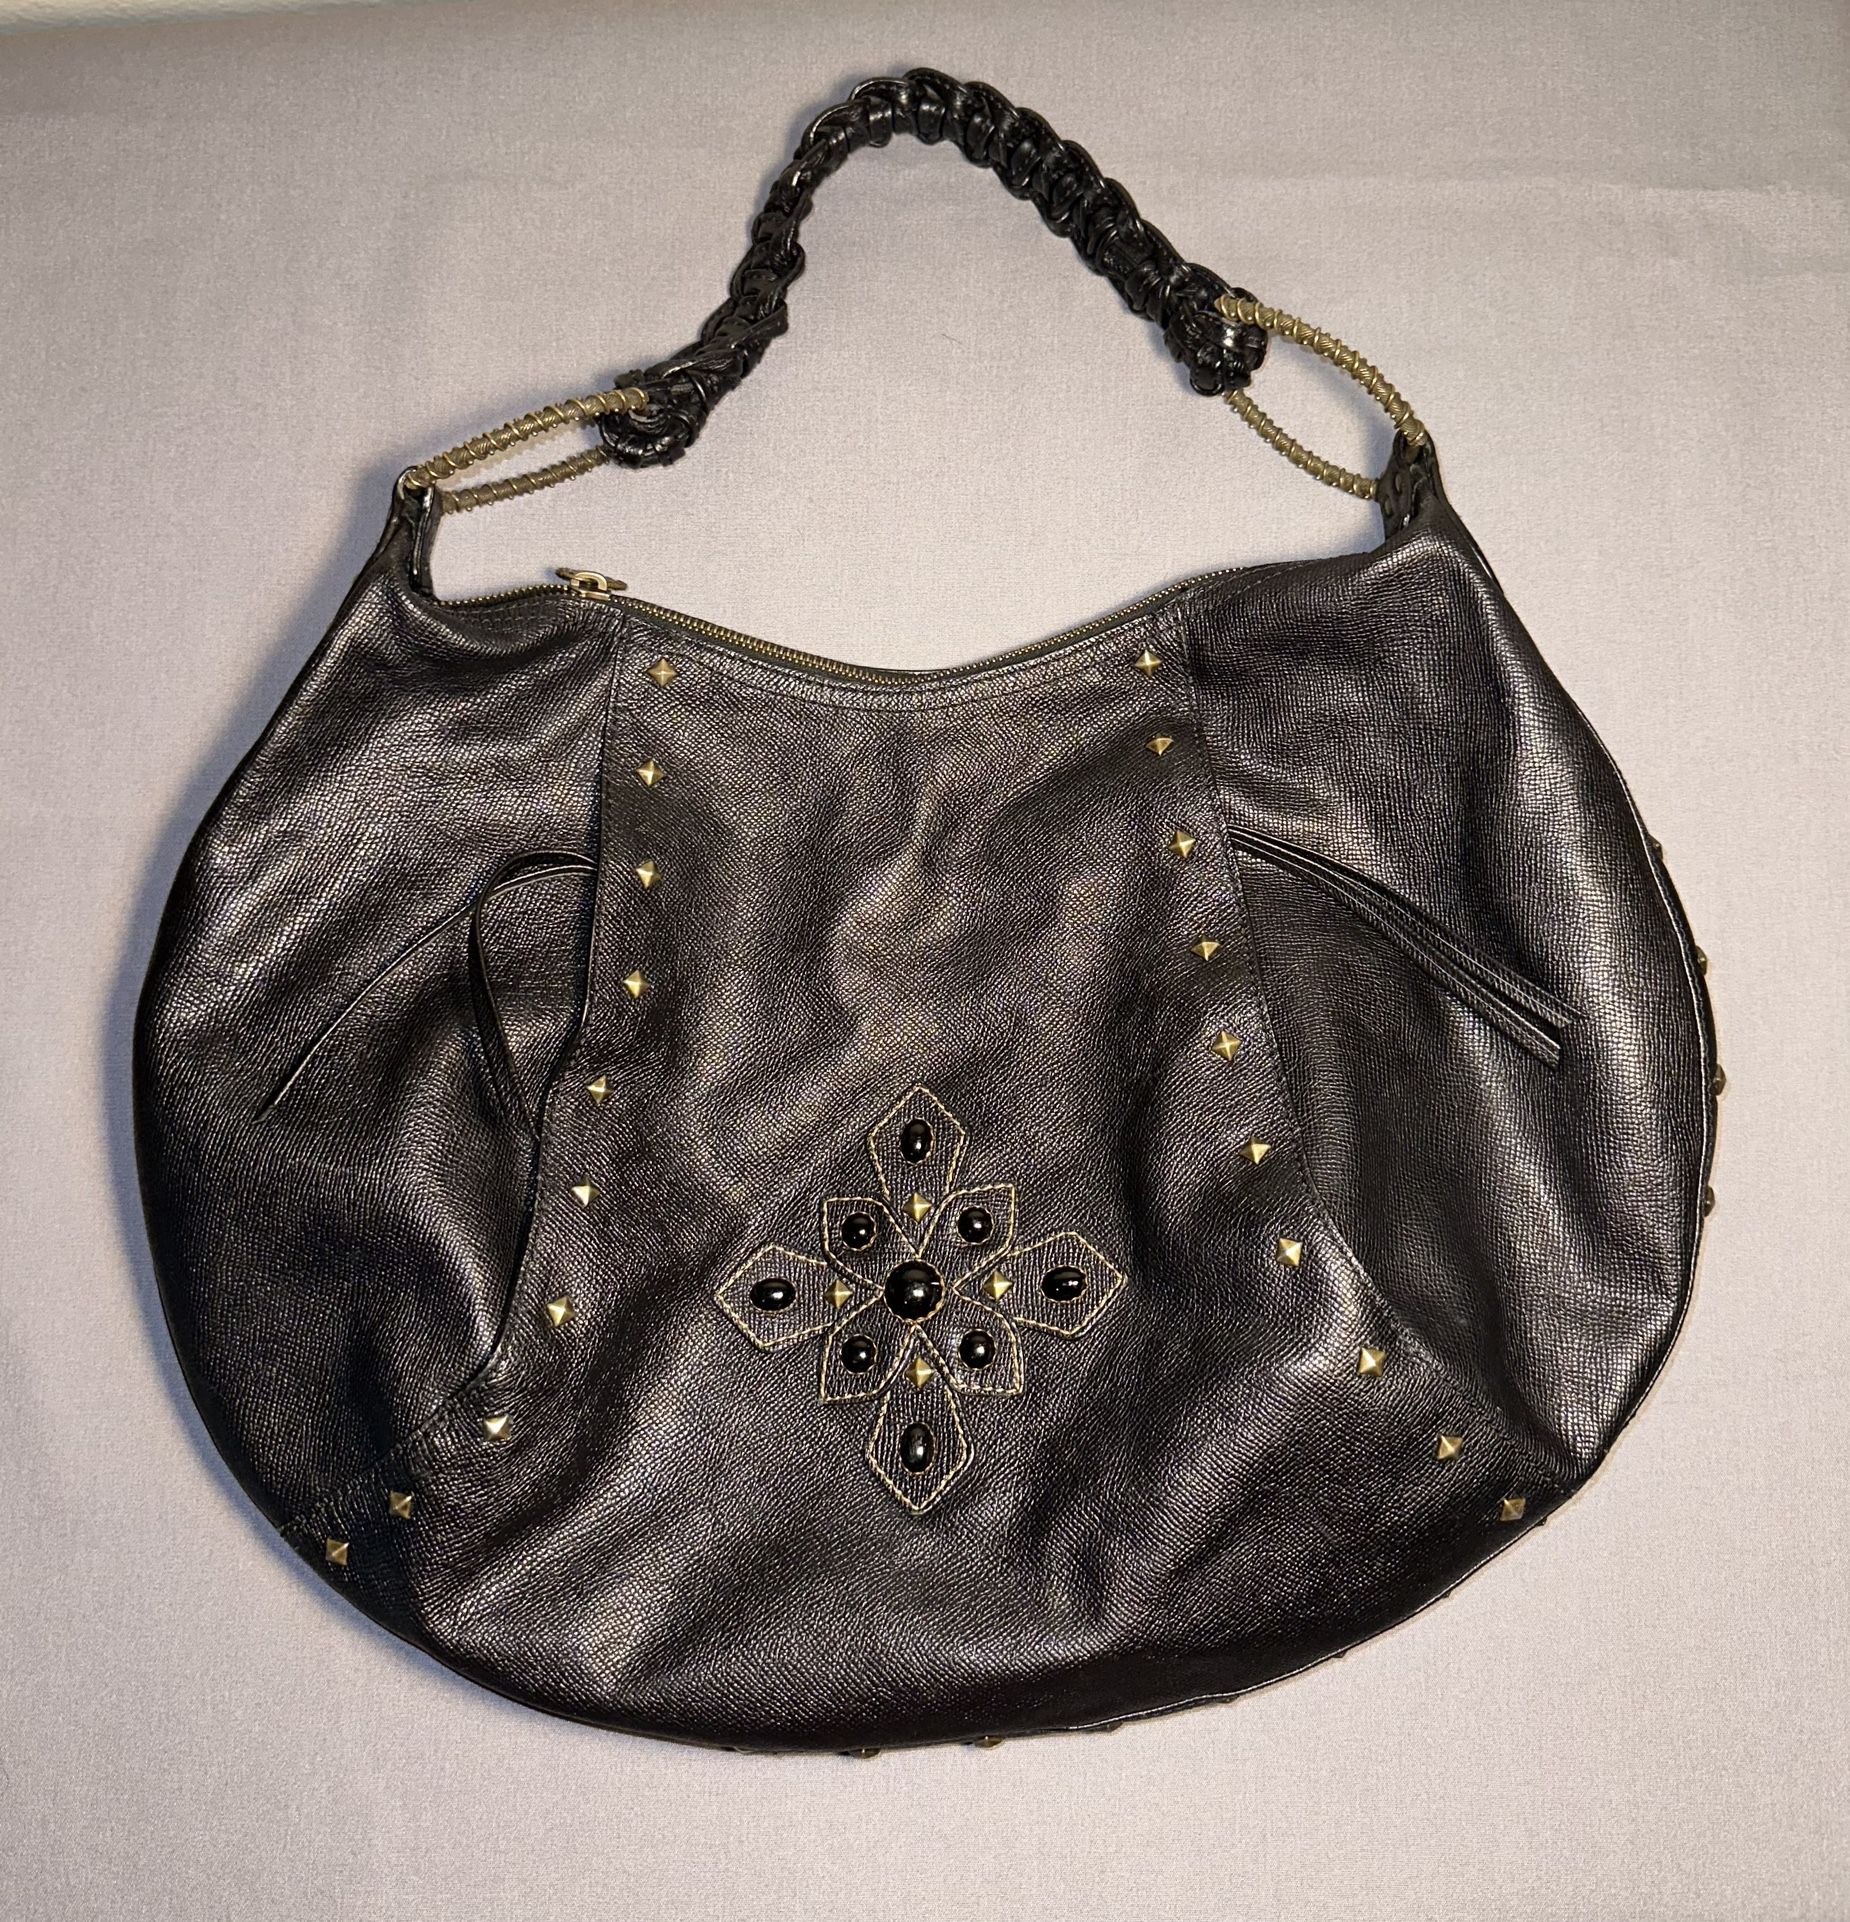 Eric Javits black leather studded ornate intricate hobo shoulder bag purse large.   20.75” x 13.75” x 0.75” with an 8” strap drop   Outside pockets  E